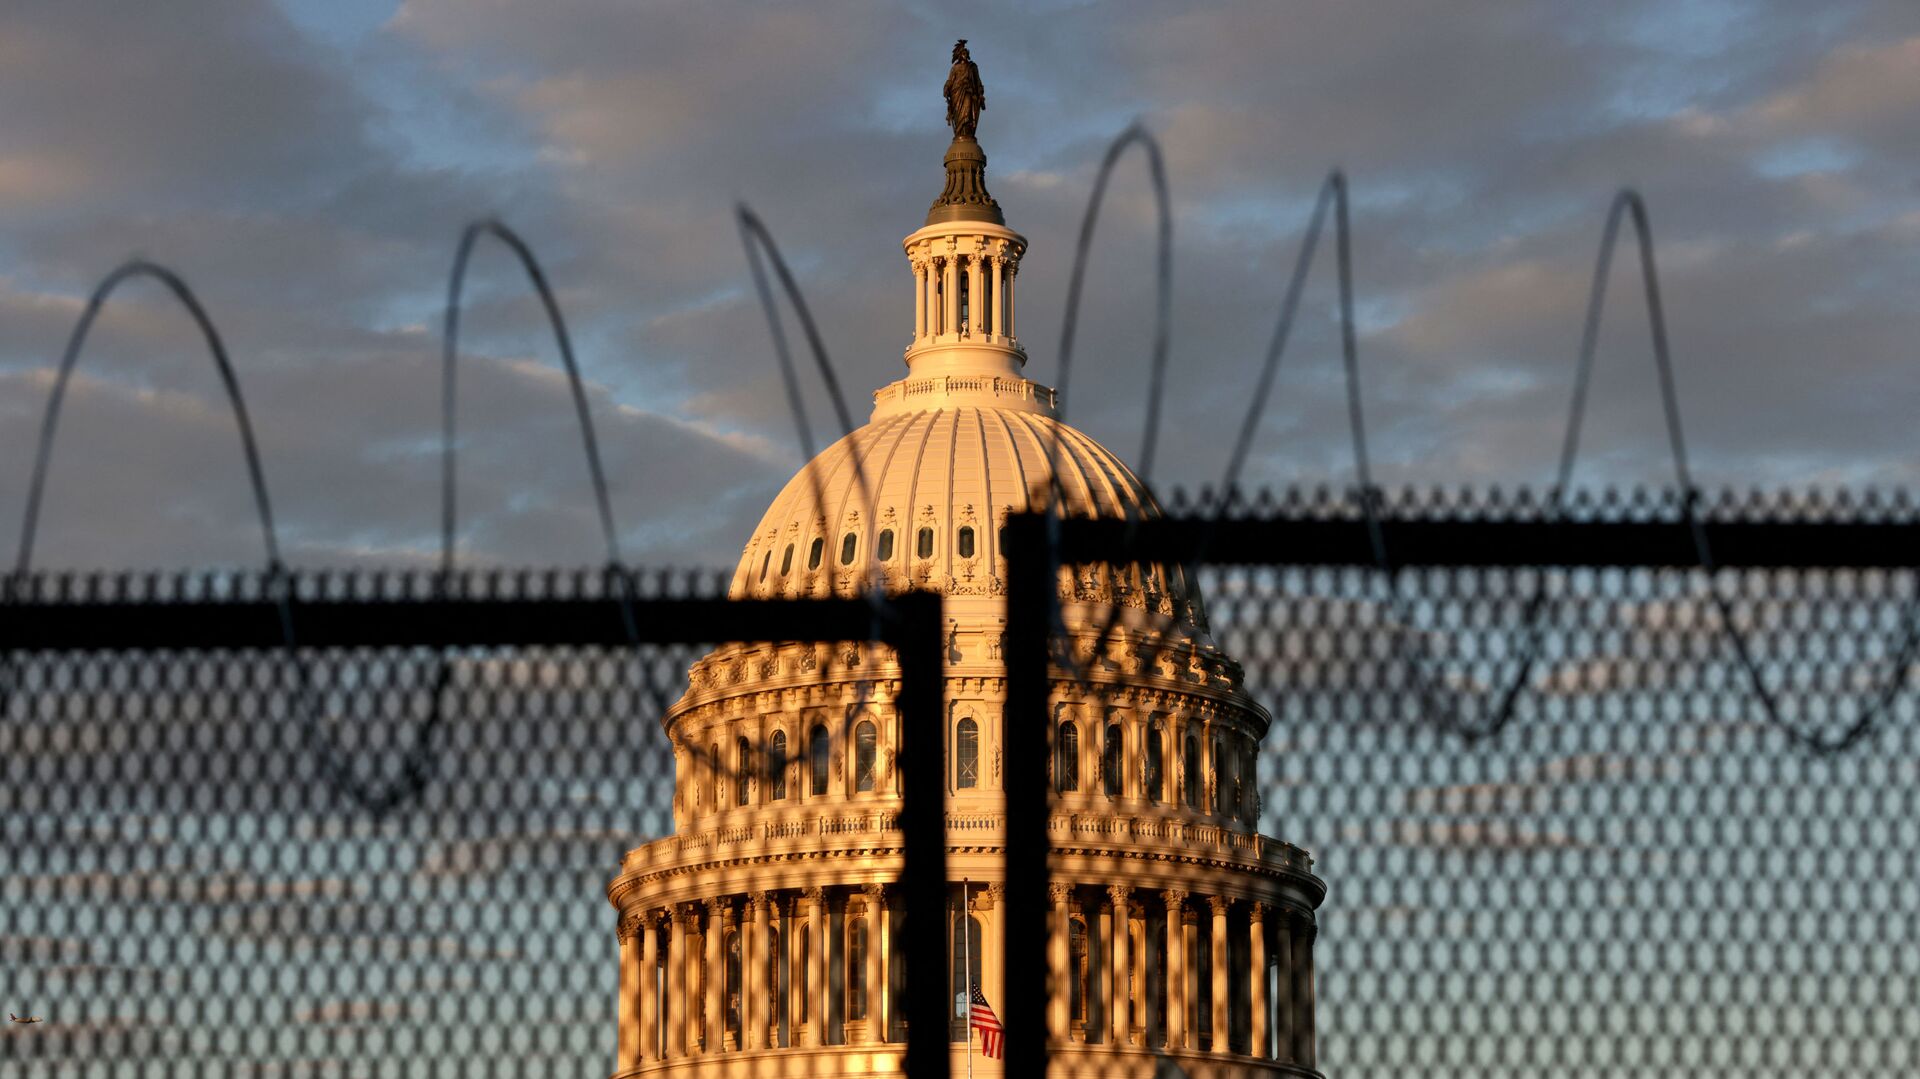  The U.S. Capitol is seen behind a fence with razor wire during sunrise on January 16, 2021 in Washington, DC. After last week's riots at the U.S. Capitol Building, the FBI has warned of additional threats in the nation's capital and in all 50 states. According to reports, as many as 25,000 National Guard soldiers will be guarding the city as preparations are made for the inauguration of Joe Biden as the 46th U.S. President. - Sputnik International, 1920, 12.09.2021